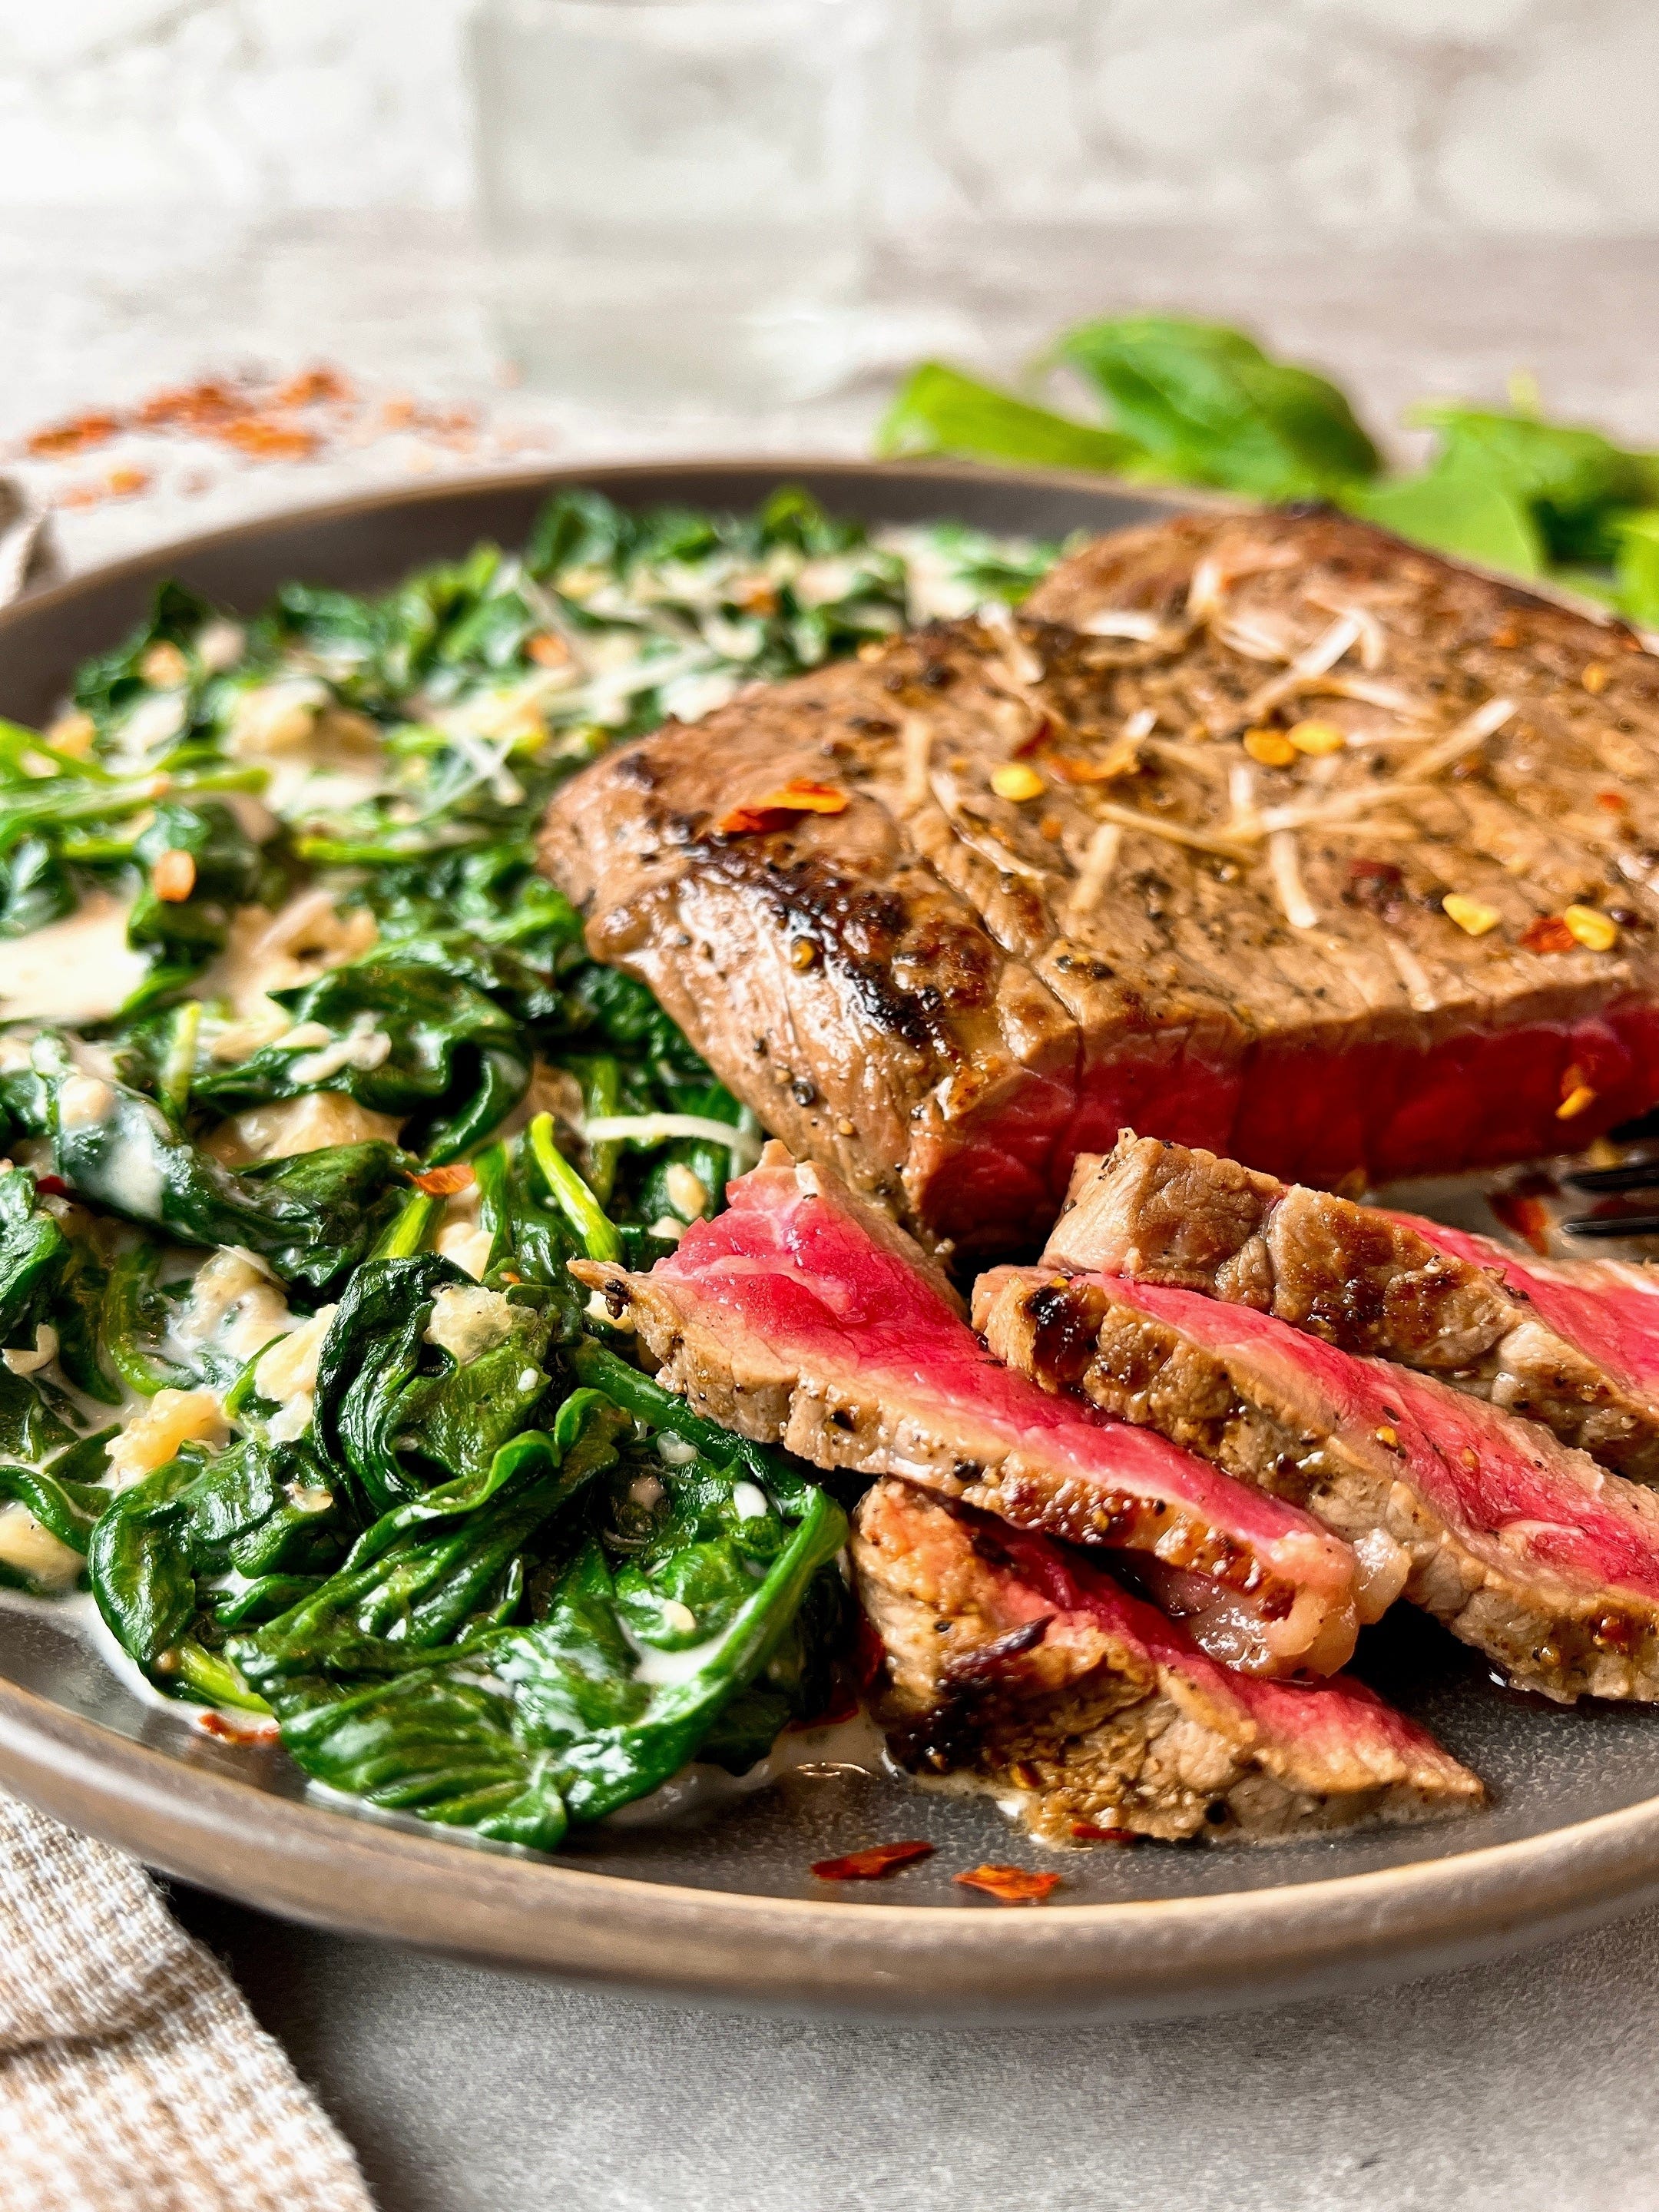 Steak Florentine is a hearty low-carb main that's packed with flavor.